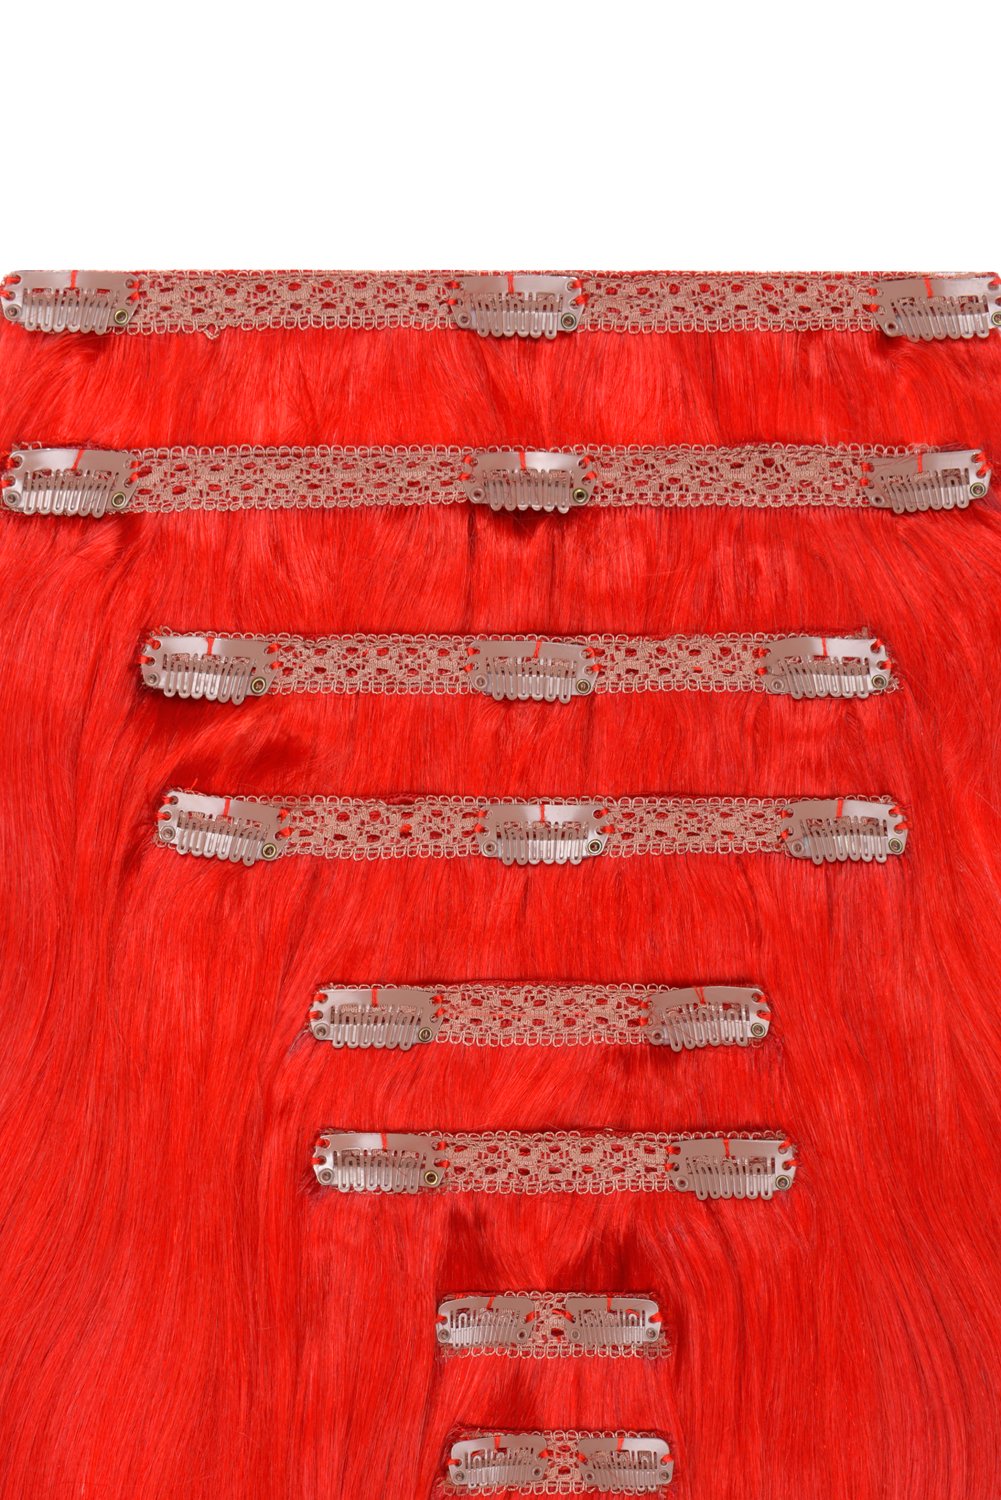 Double Wefted Full Head Remy Clip in Human Hair Extensions - Bright Red